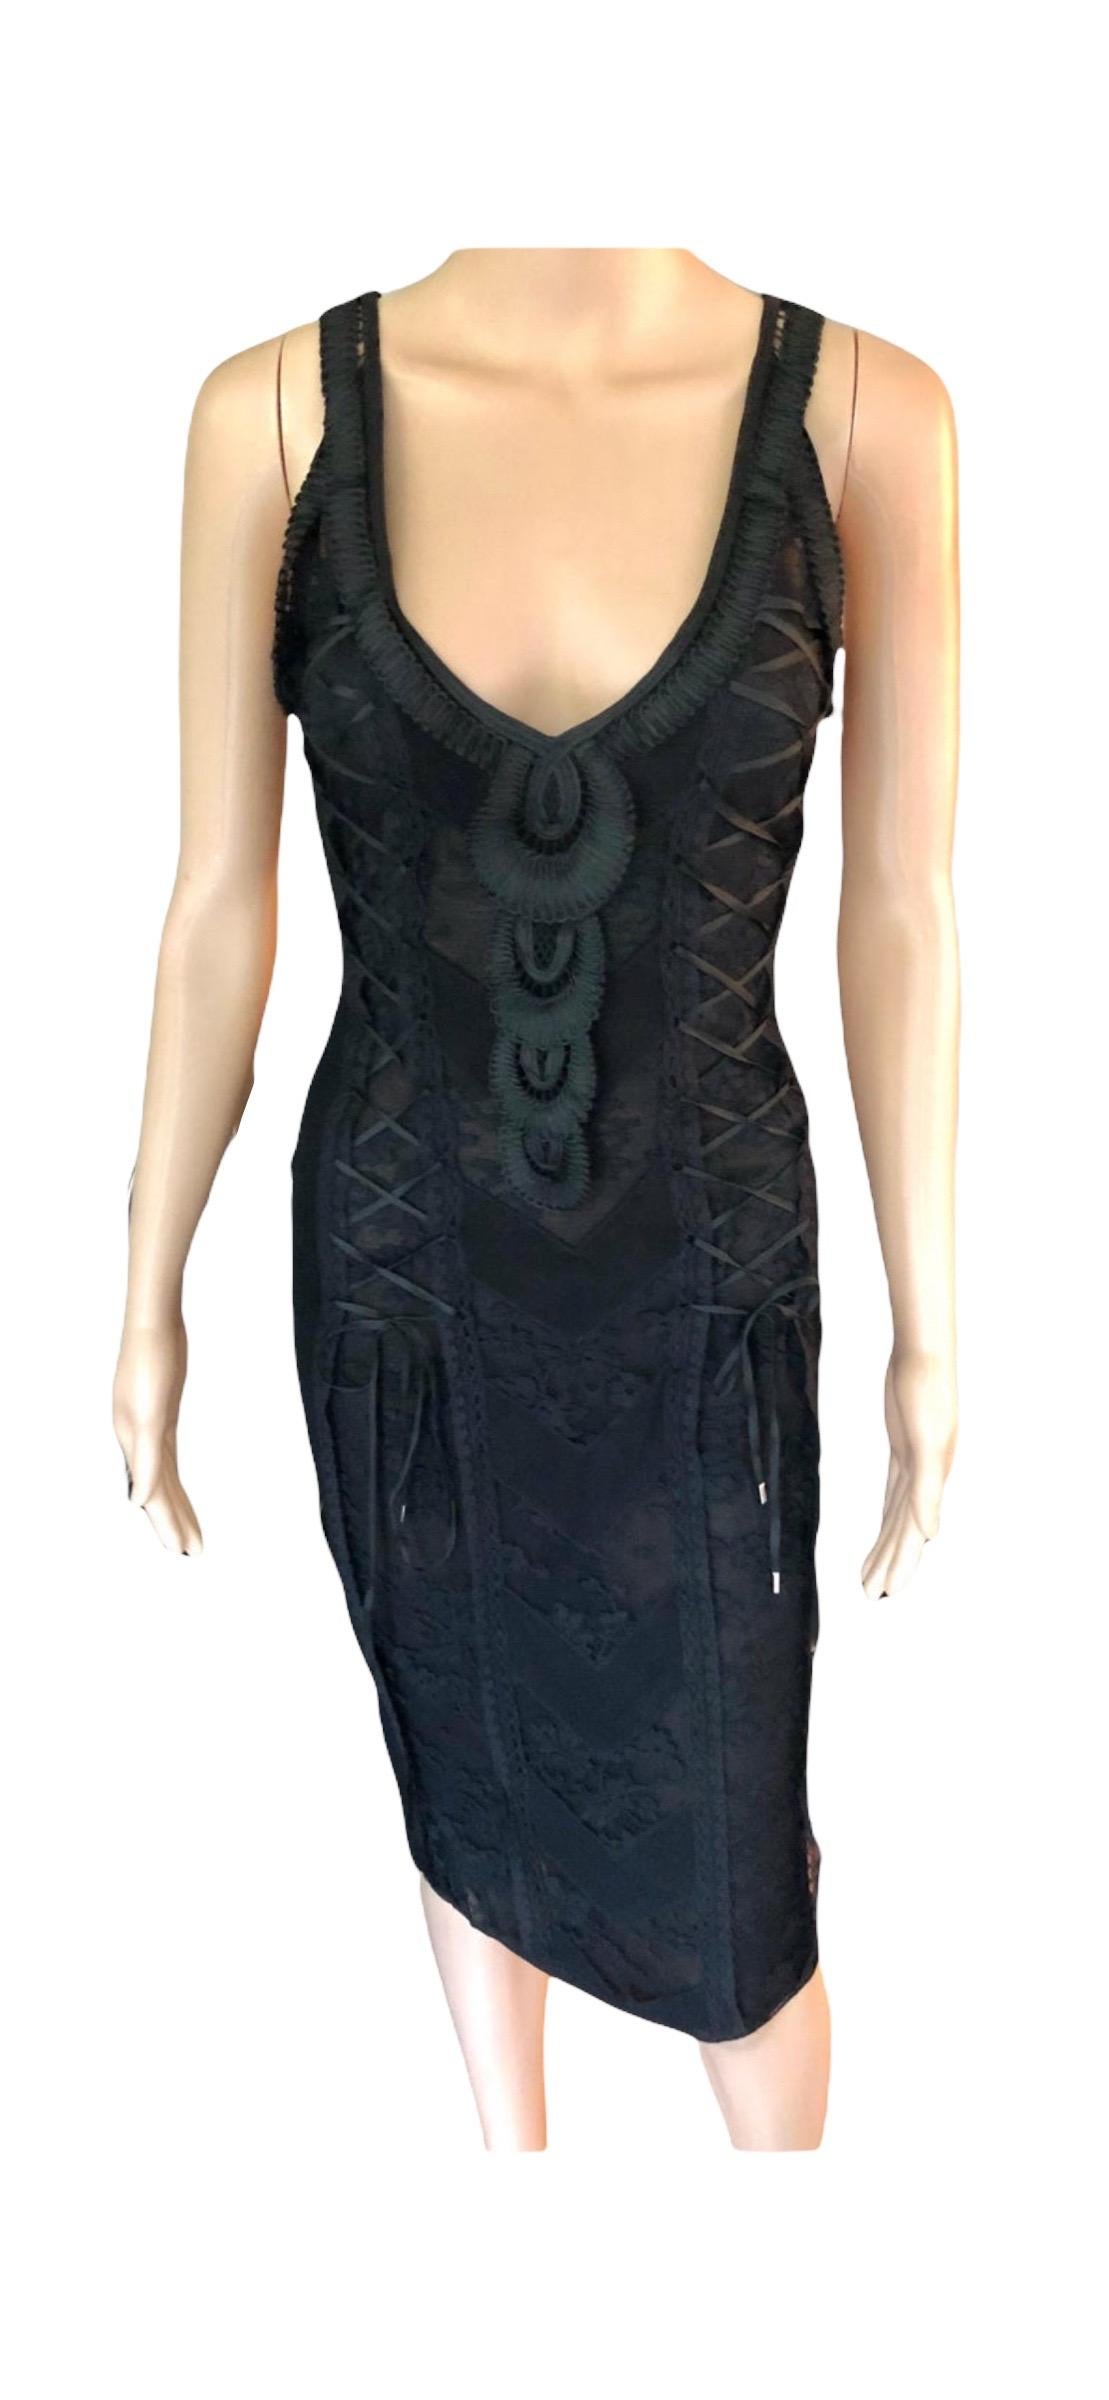 Christian Dior by John Galliano S/S 2006 Sheer Lace Trimmed Corset Knit Dress For Sale 3